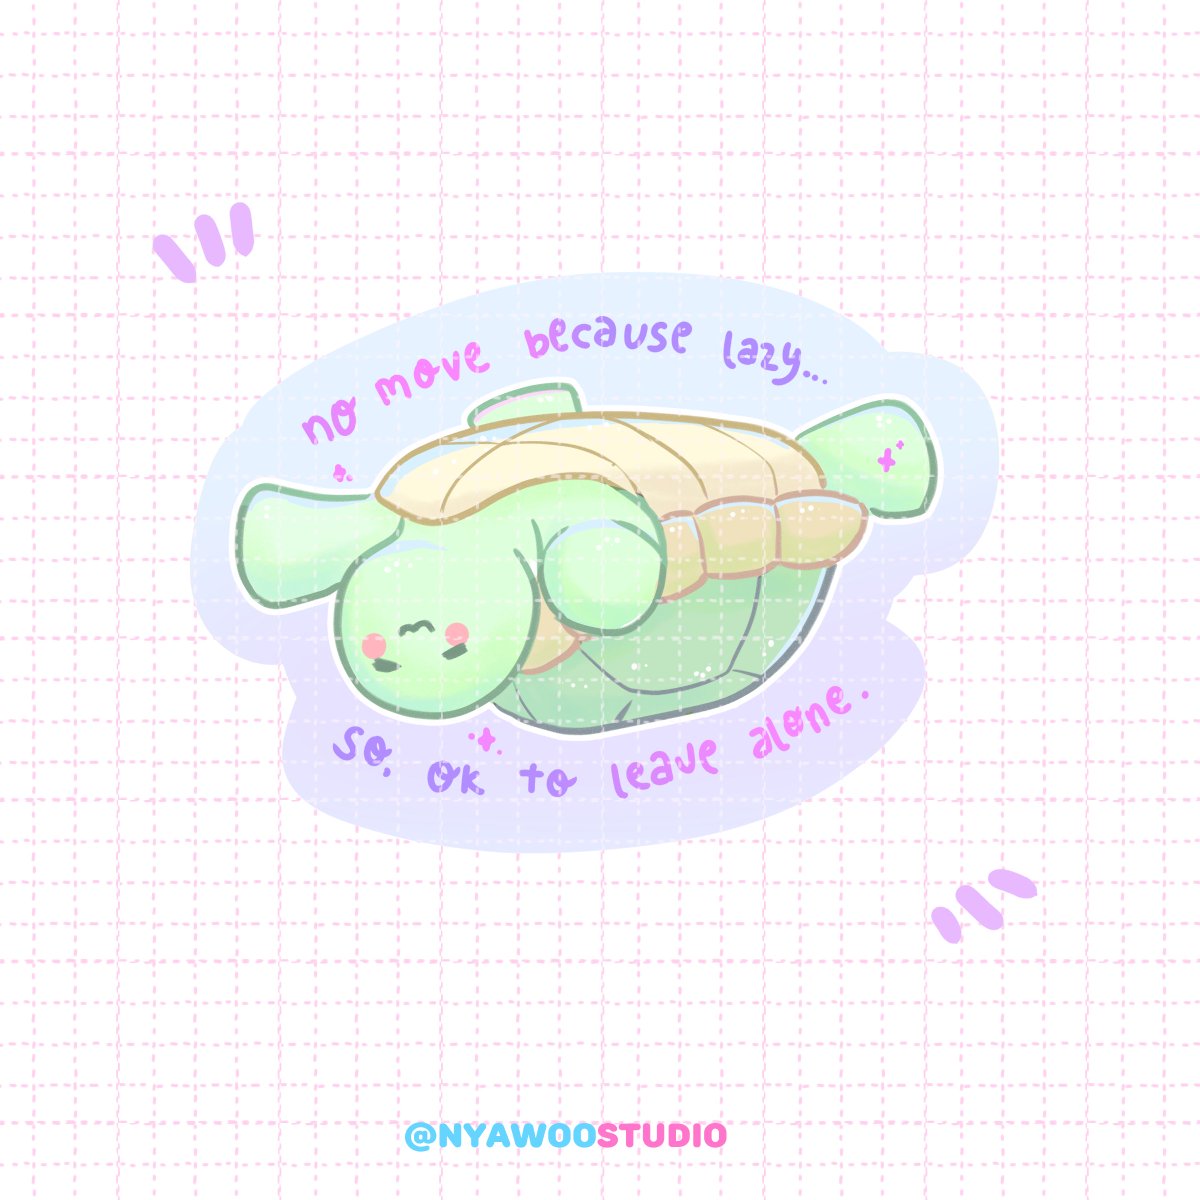 I saw this post on fb and I thought it would be funny as a sticker 😆

#cuteturtle #kawaiiillustration #kawaiistickers